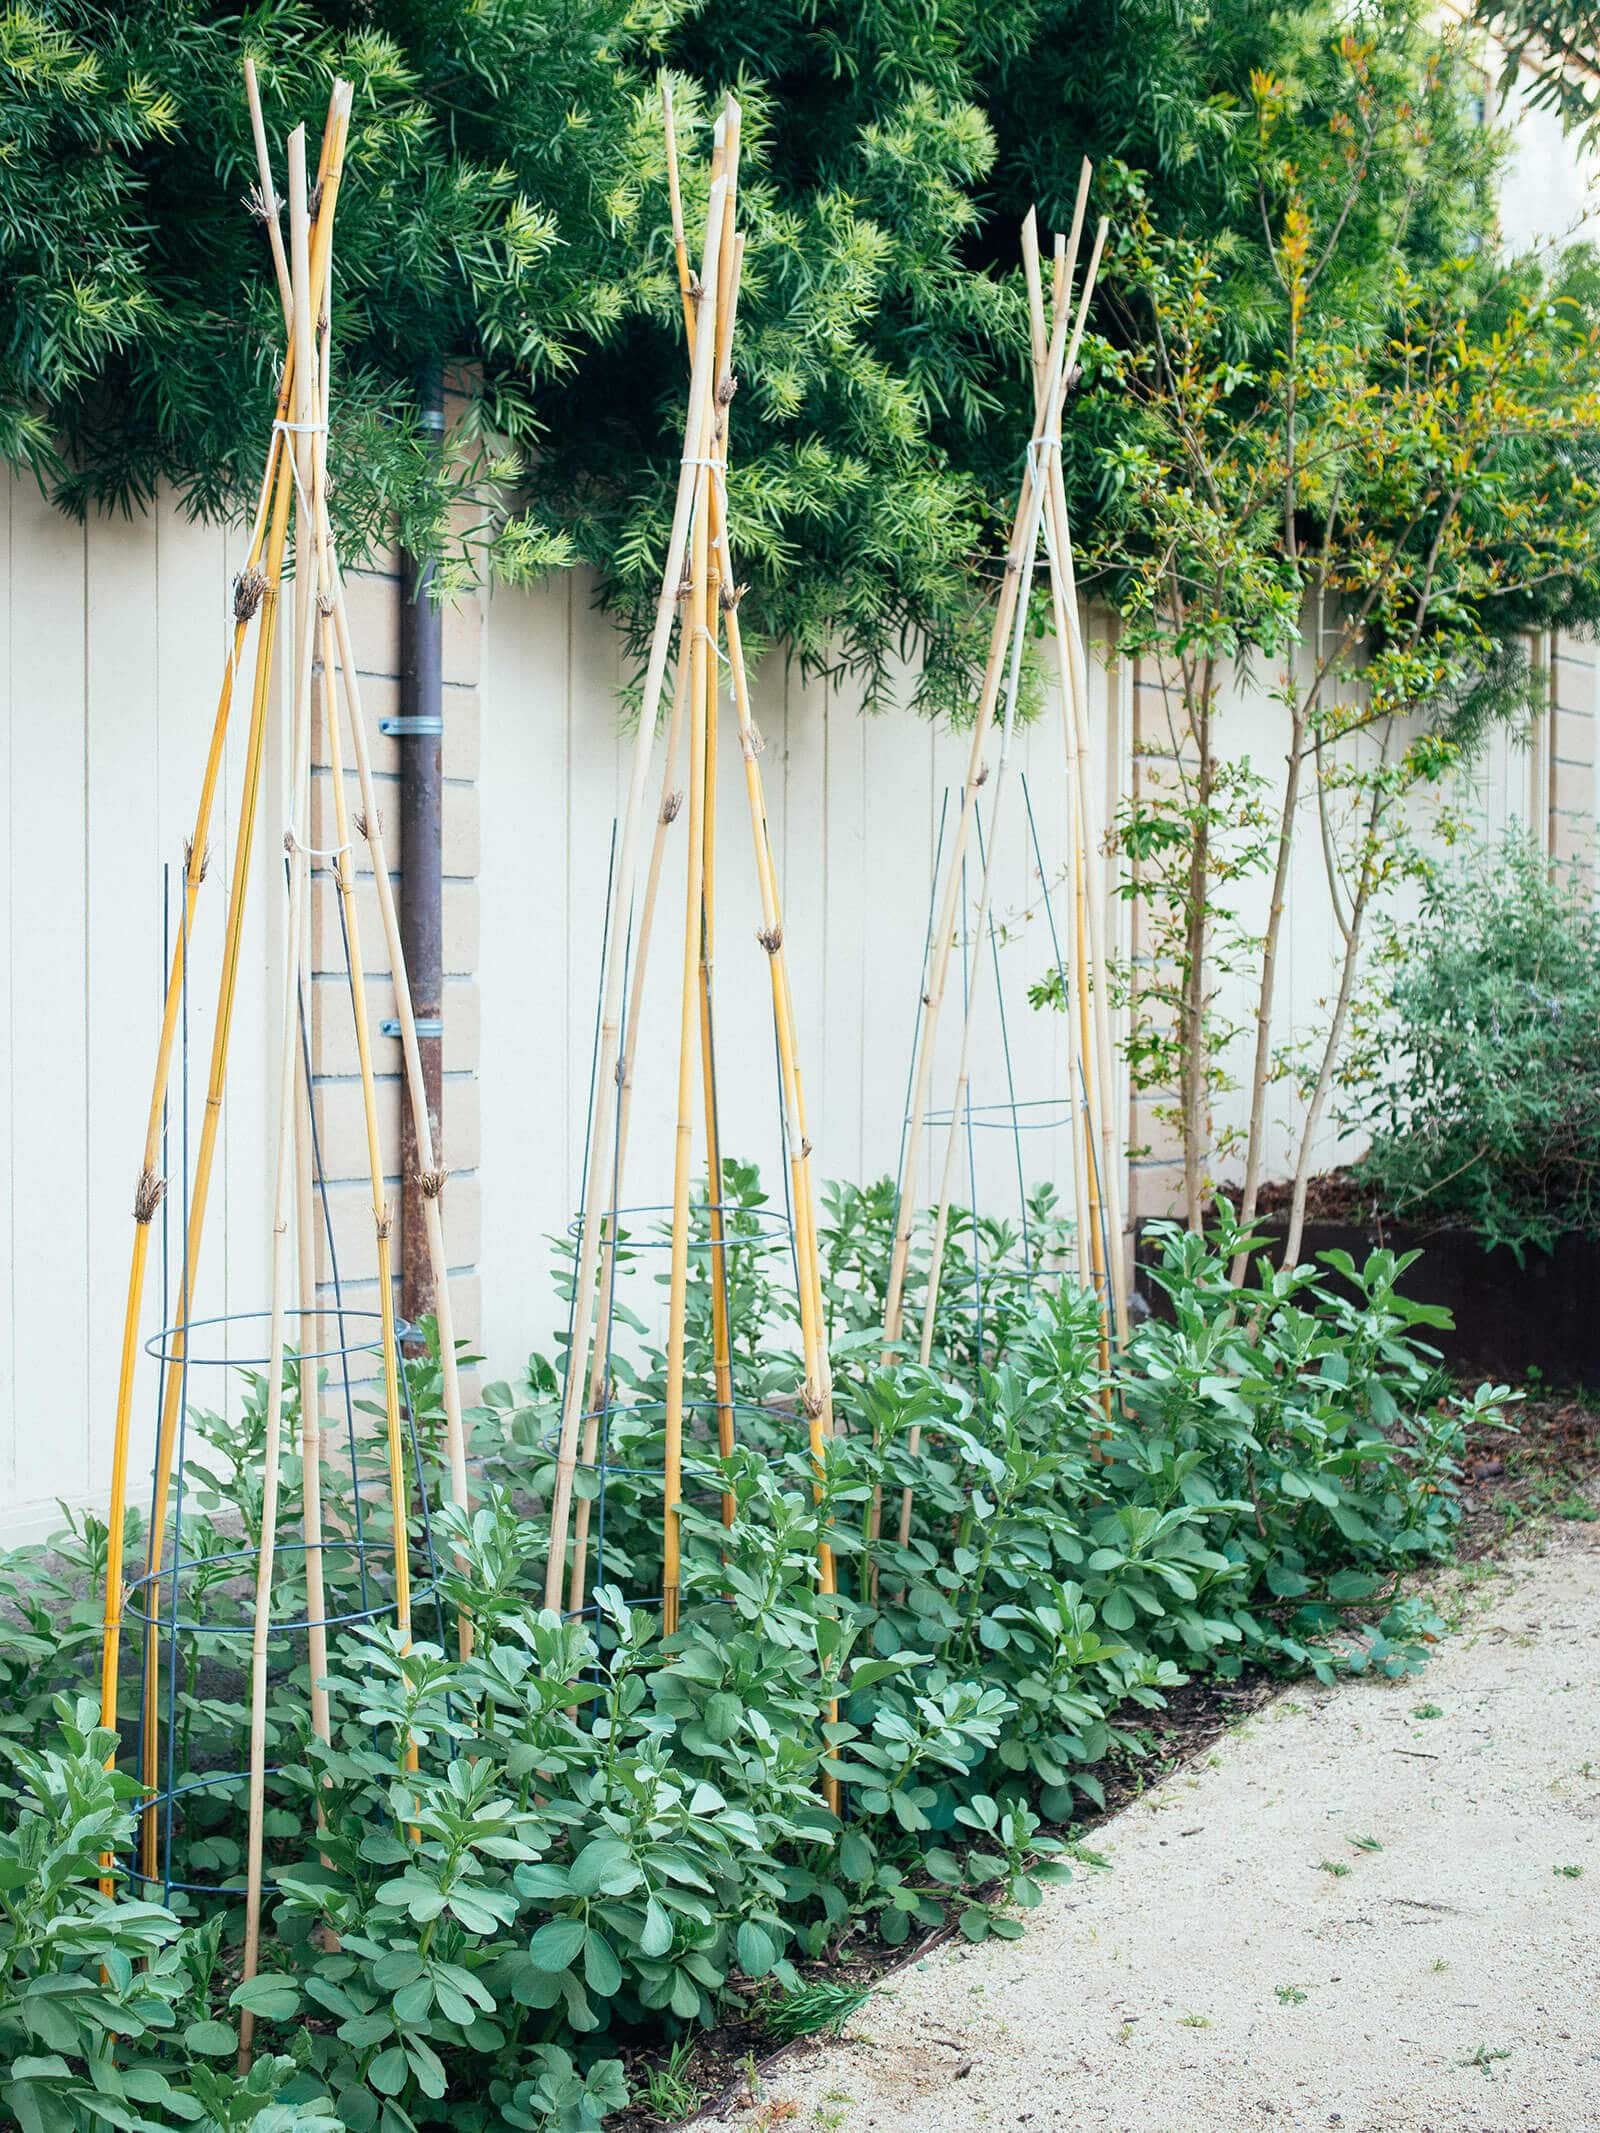 A row of fava bean plants supported with wire tomato cages and bamboo teepees